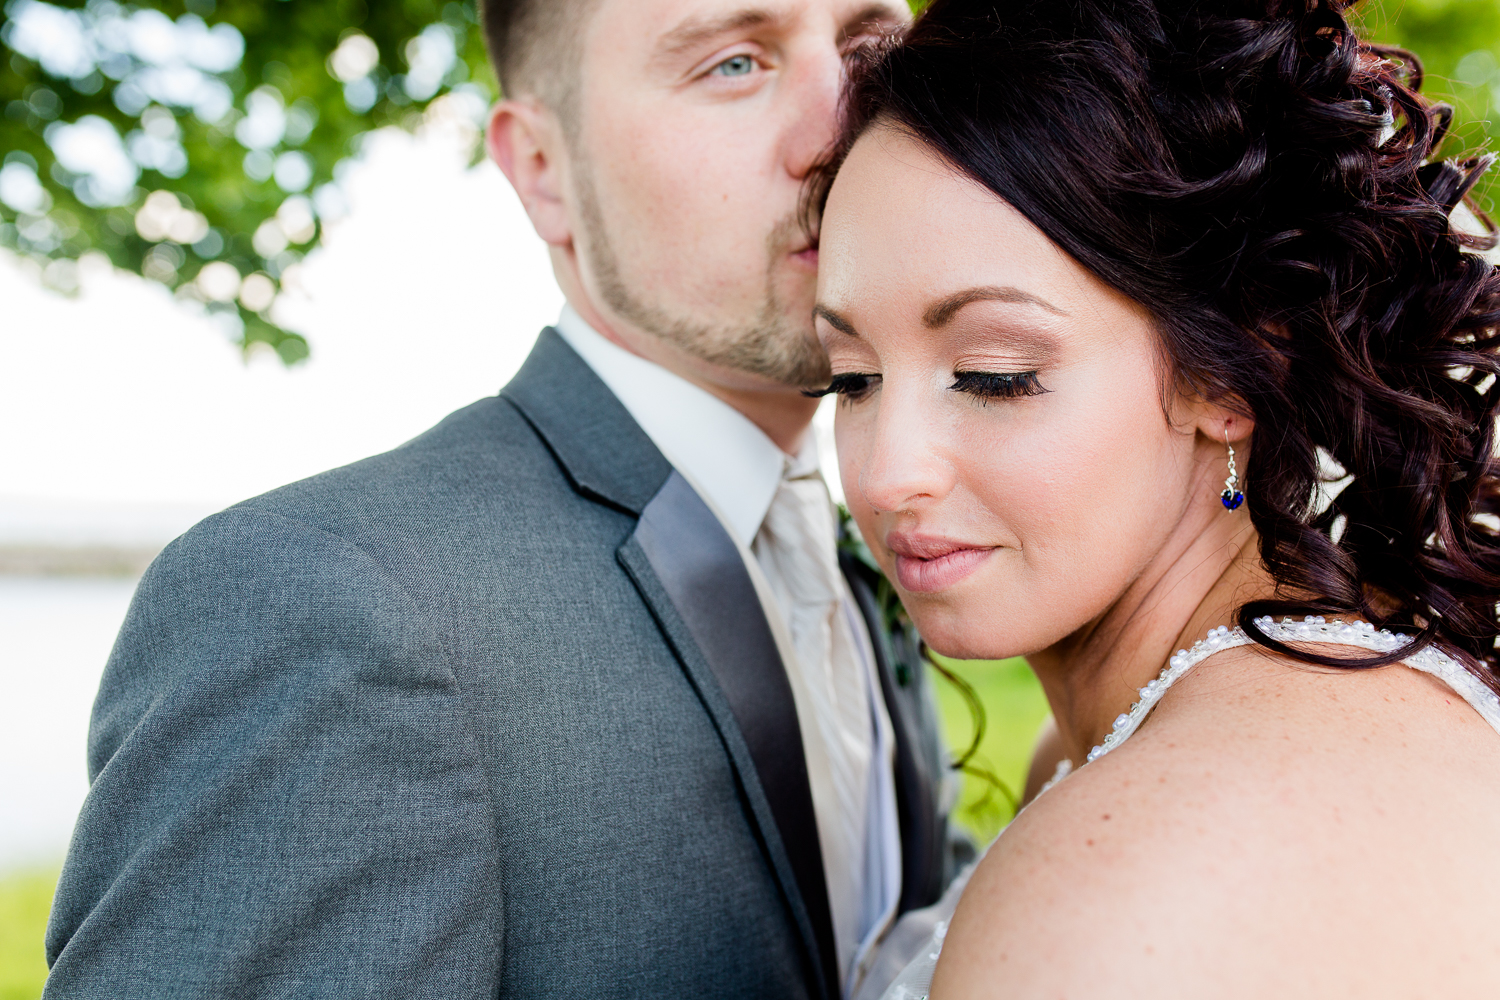  A close up of the bride's face. She has sapphire earrings on. The groom is kissing the side of her head. 